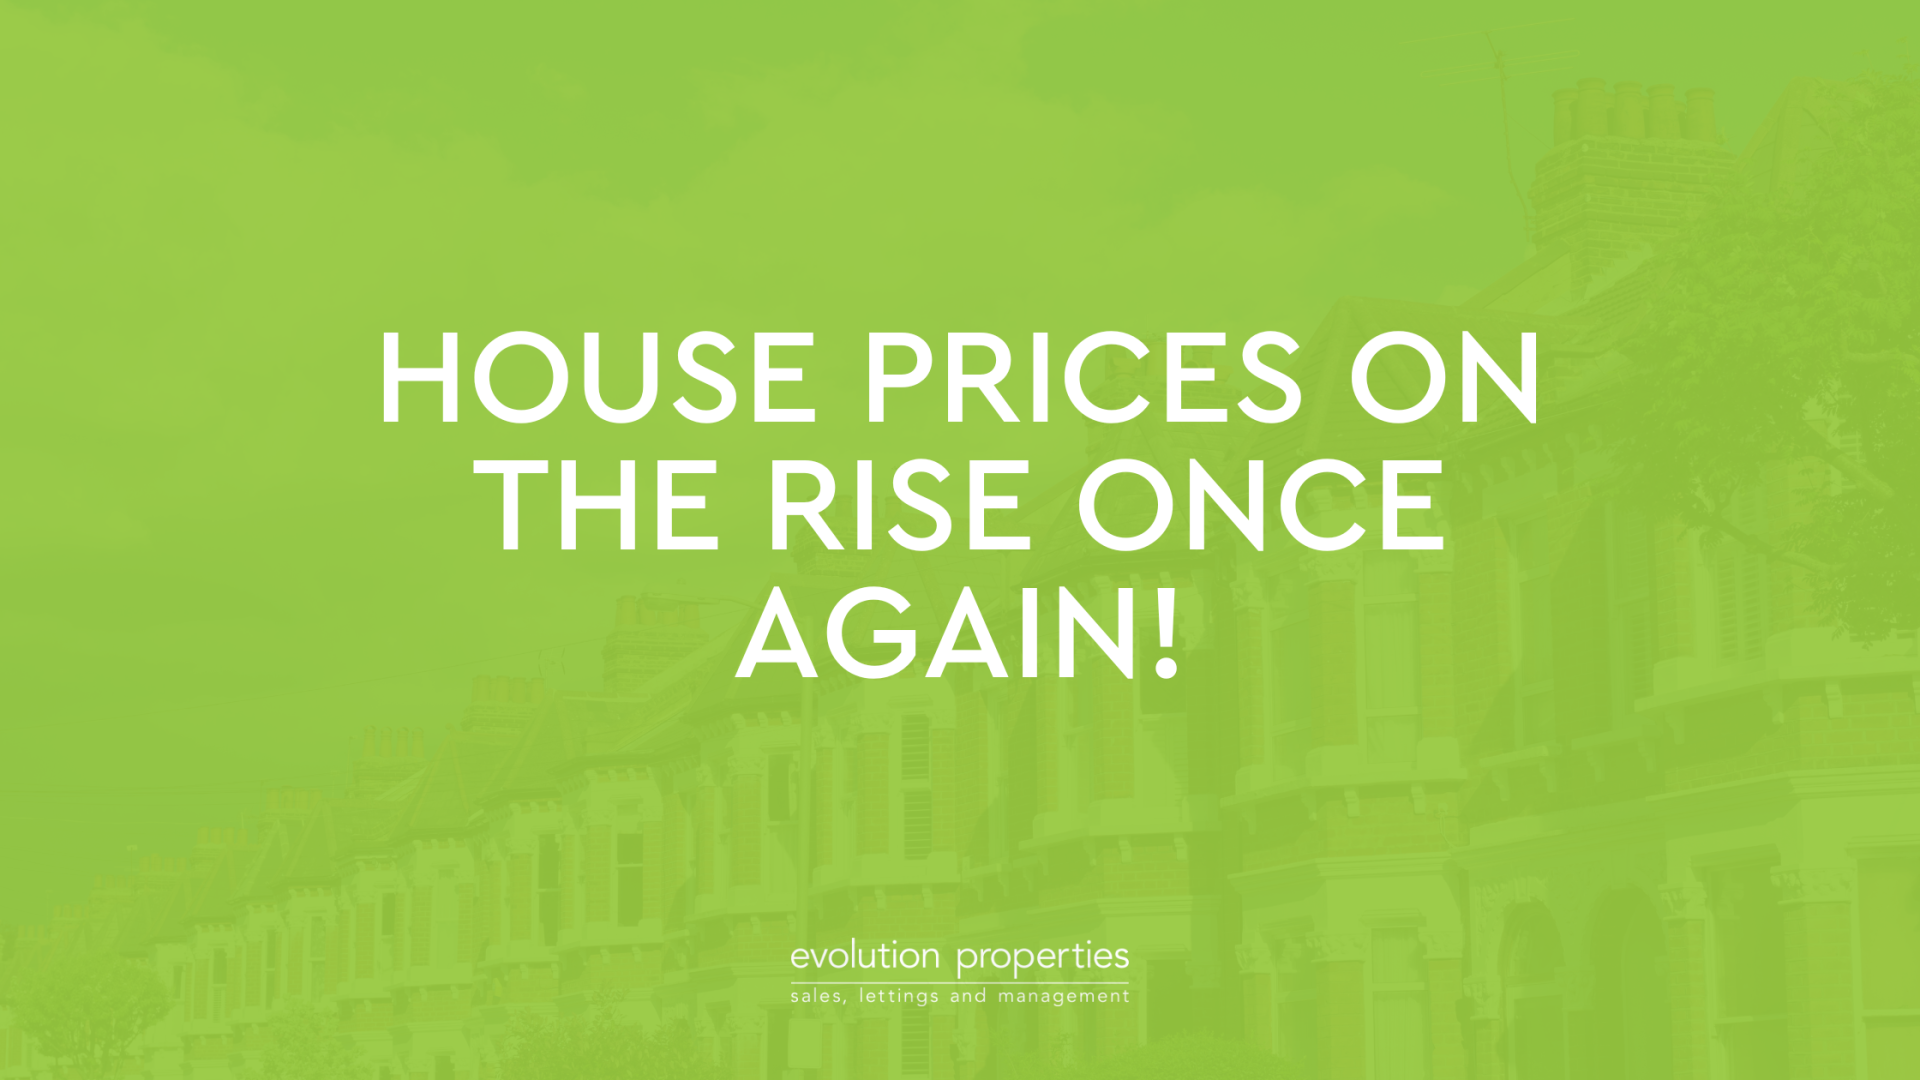 House prices on the rise once again!